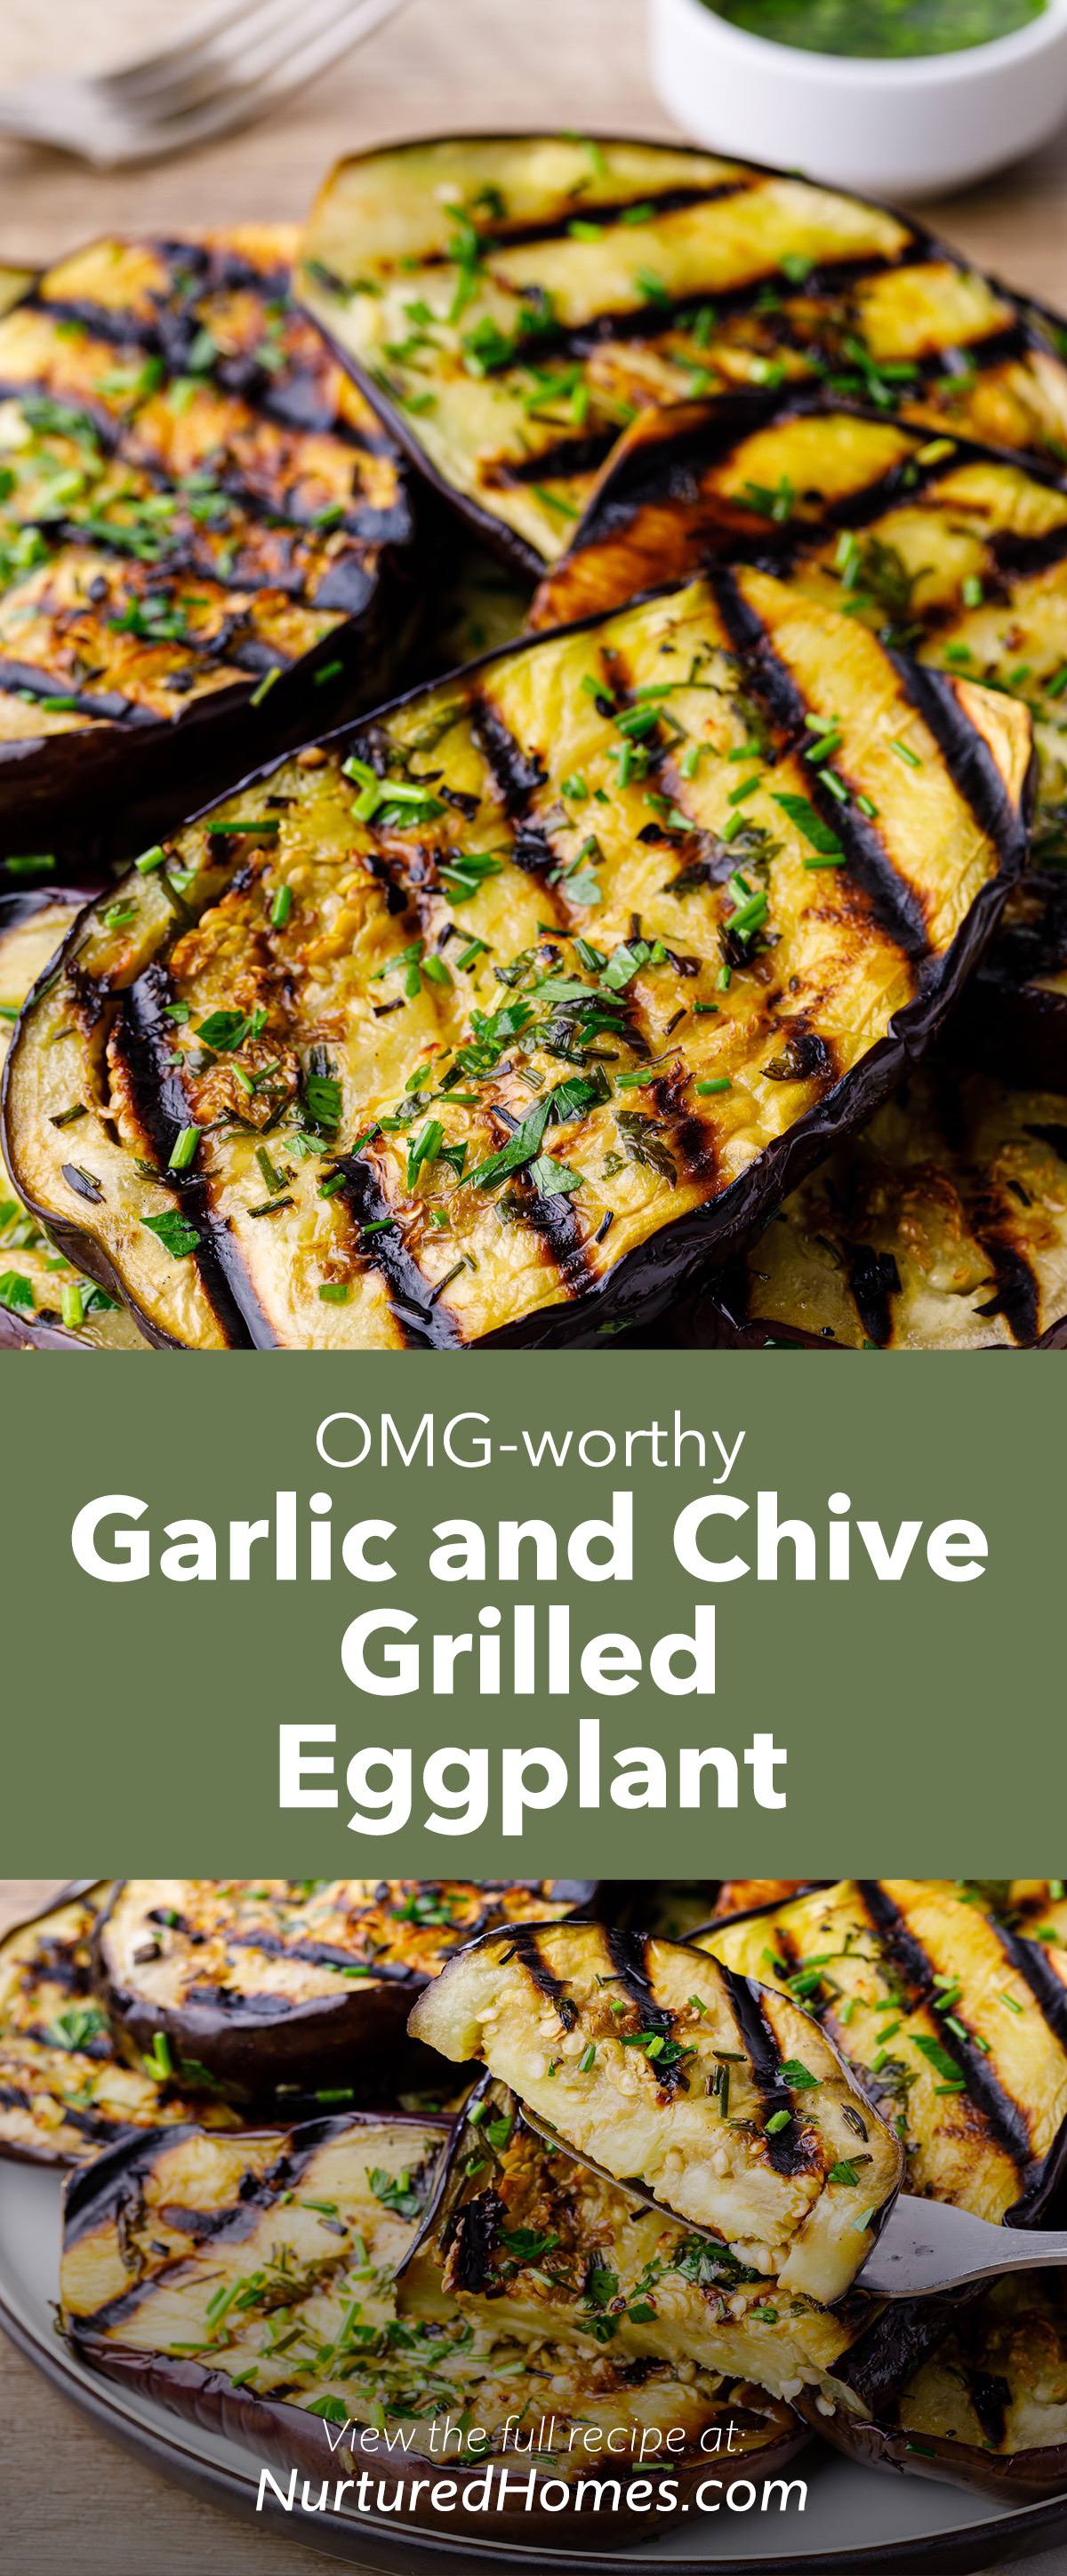 Garlic and Chive Grilled Eggplant